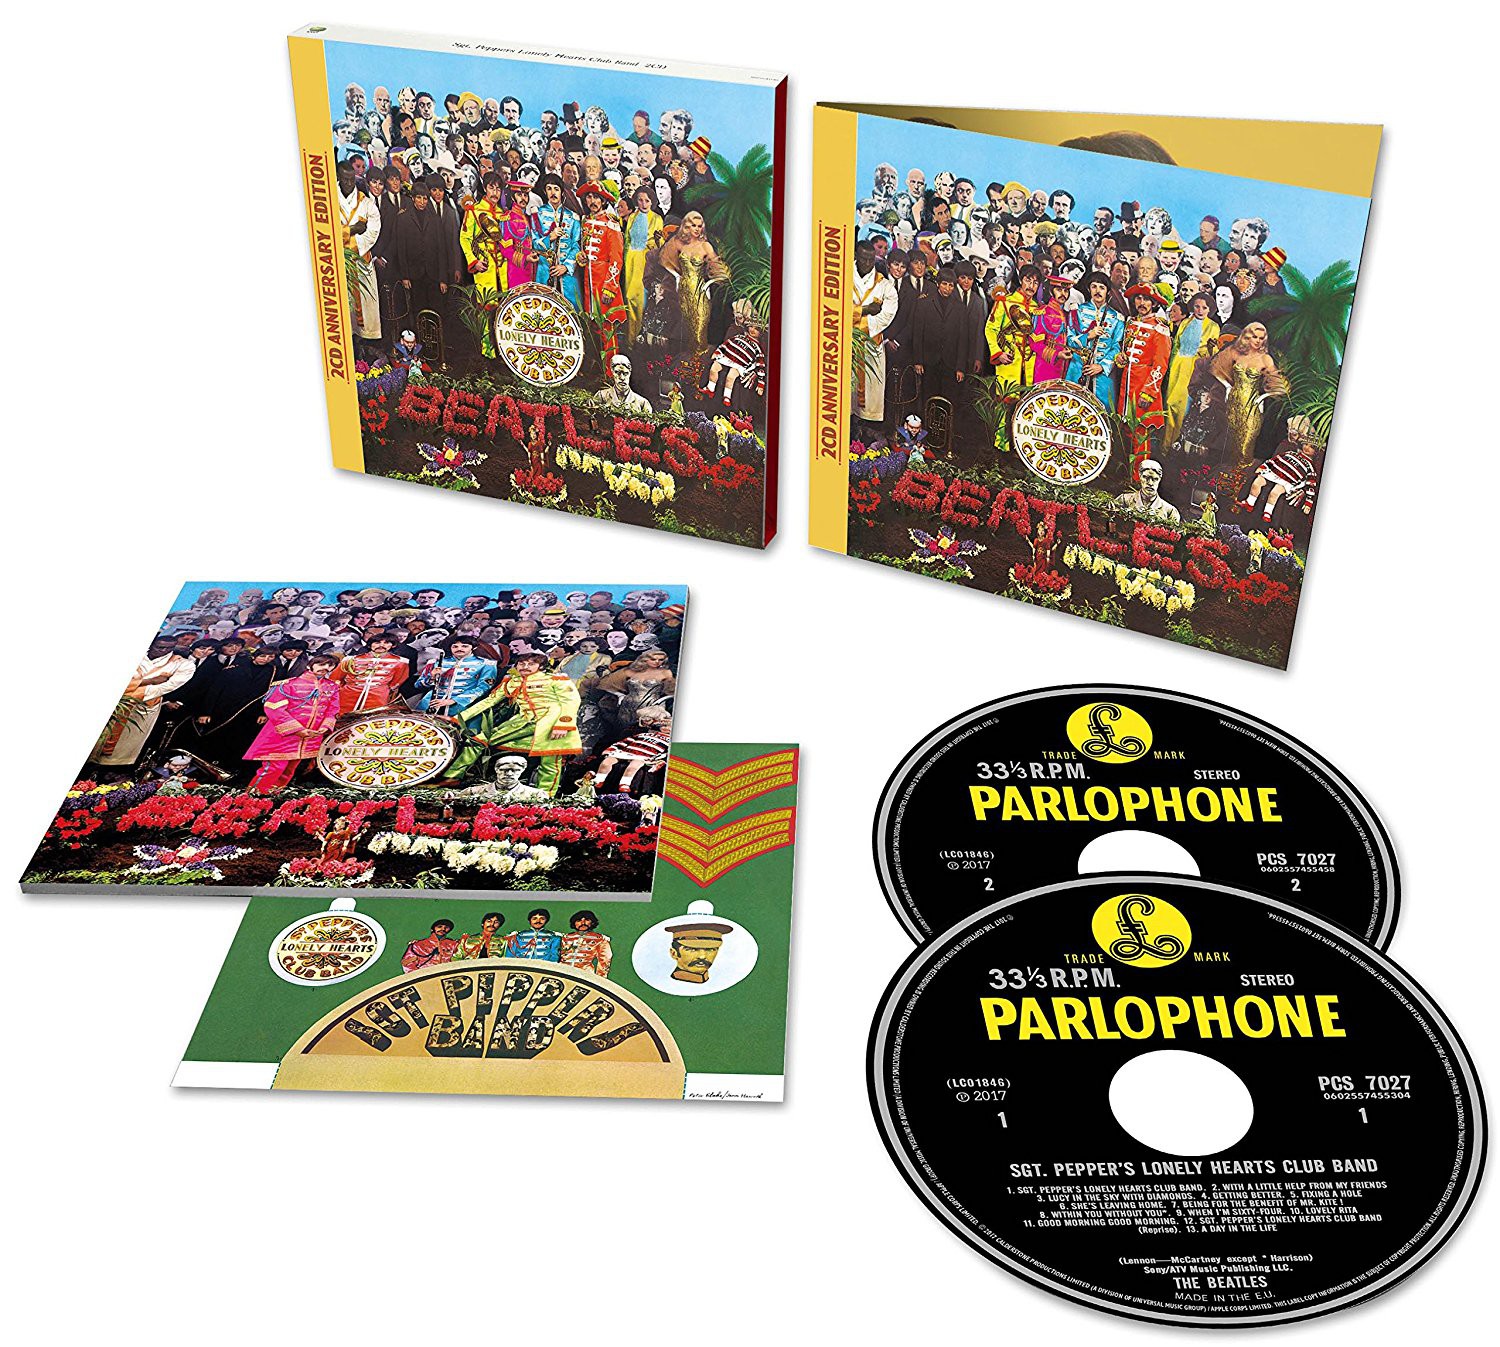 Beatles sgt peppers lonely hearts club. The Beatles Sgt. Pepper's Lonely Hearts Club Band 1967. Sgt Pepper's Lonely Hearts Club Band. The Beatles Sgt. Pepper's Lonely Hearts Club Band 2017. Beatles Sgt Pepper's Lonely Hearts Club Band CD.